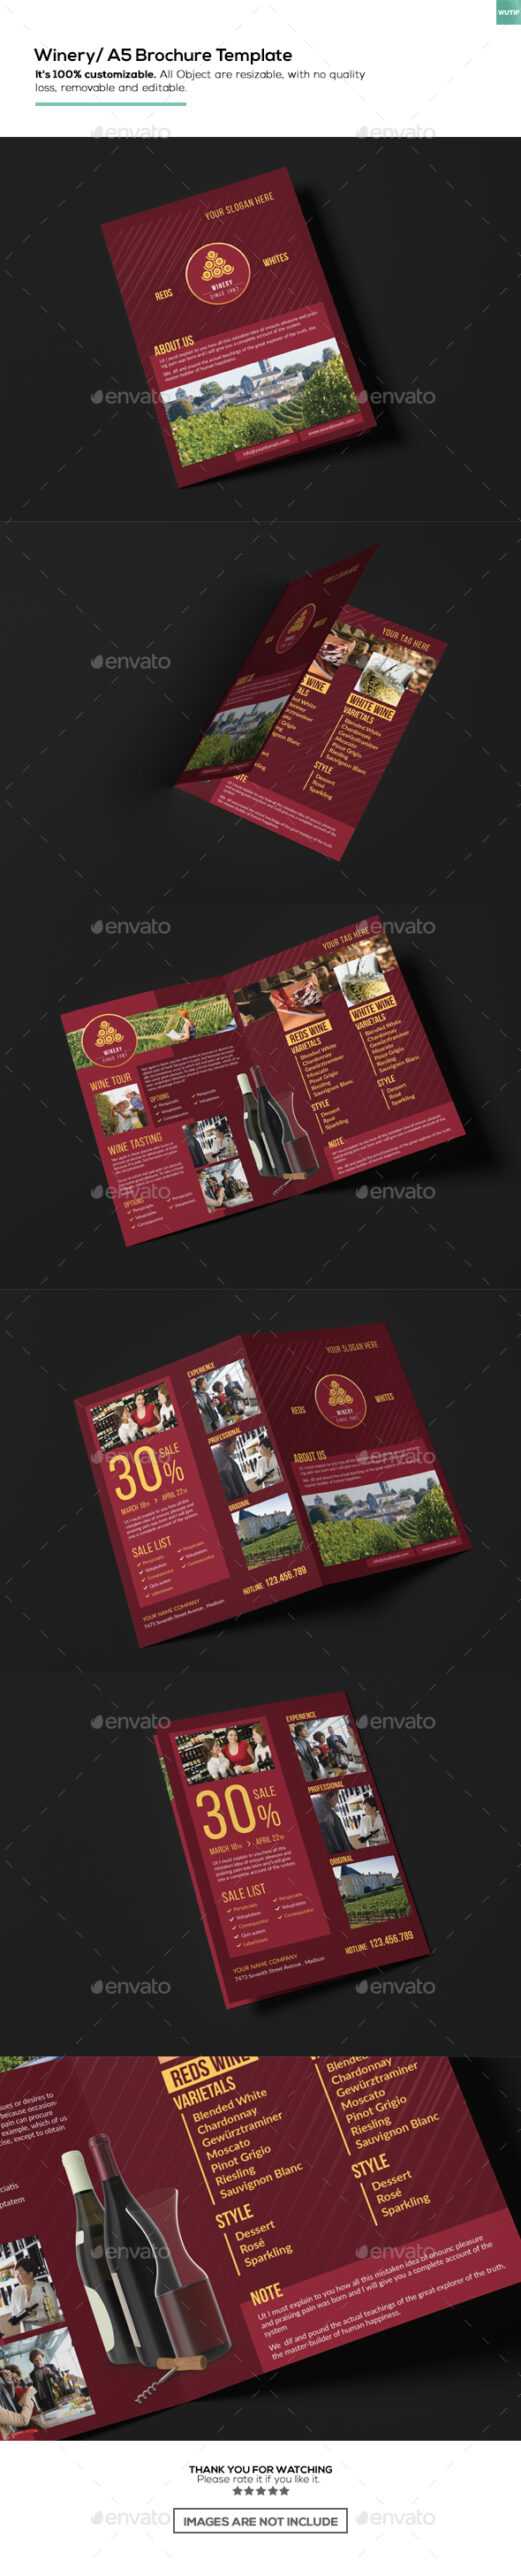 Wine Brochure Templates From Graphicriver Pertaining To Wine Brochure Template